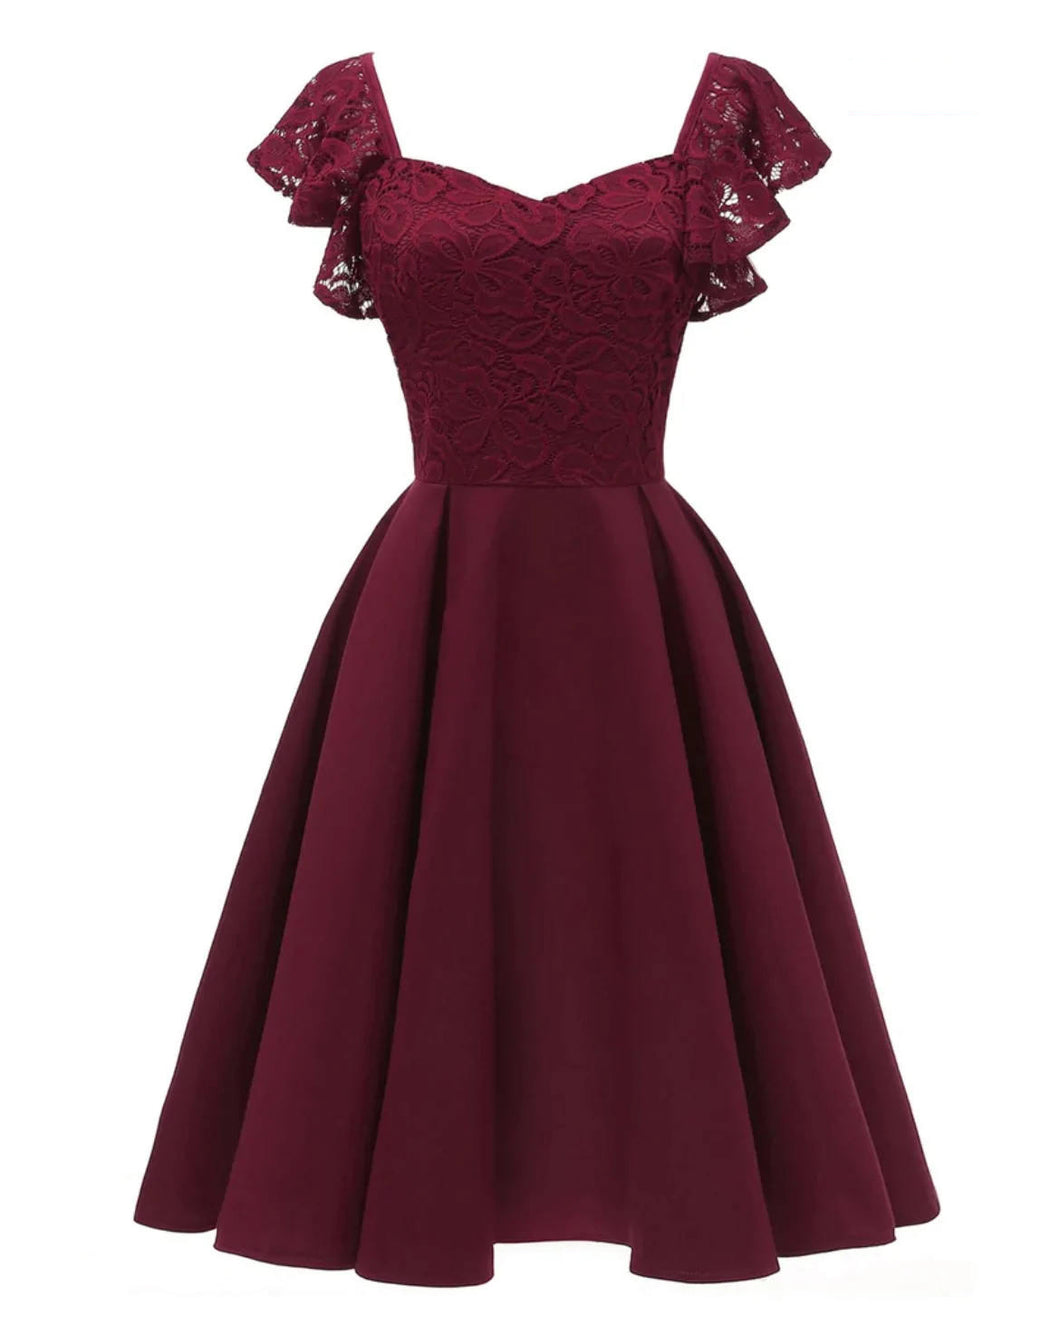 1950s Wine Midi Length Lace and Satin Party Dress Short Butterfly Sleeves